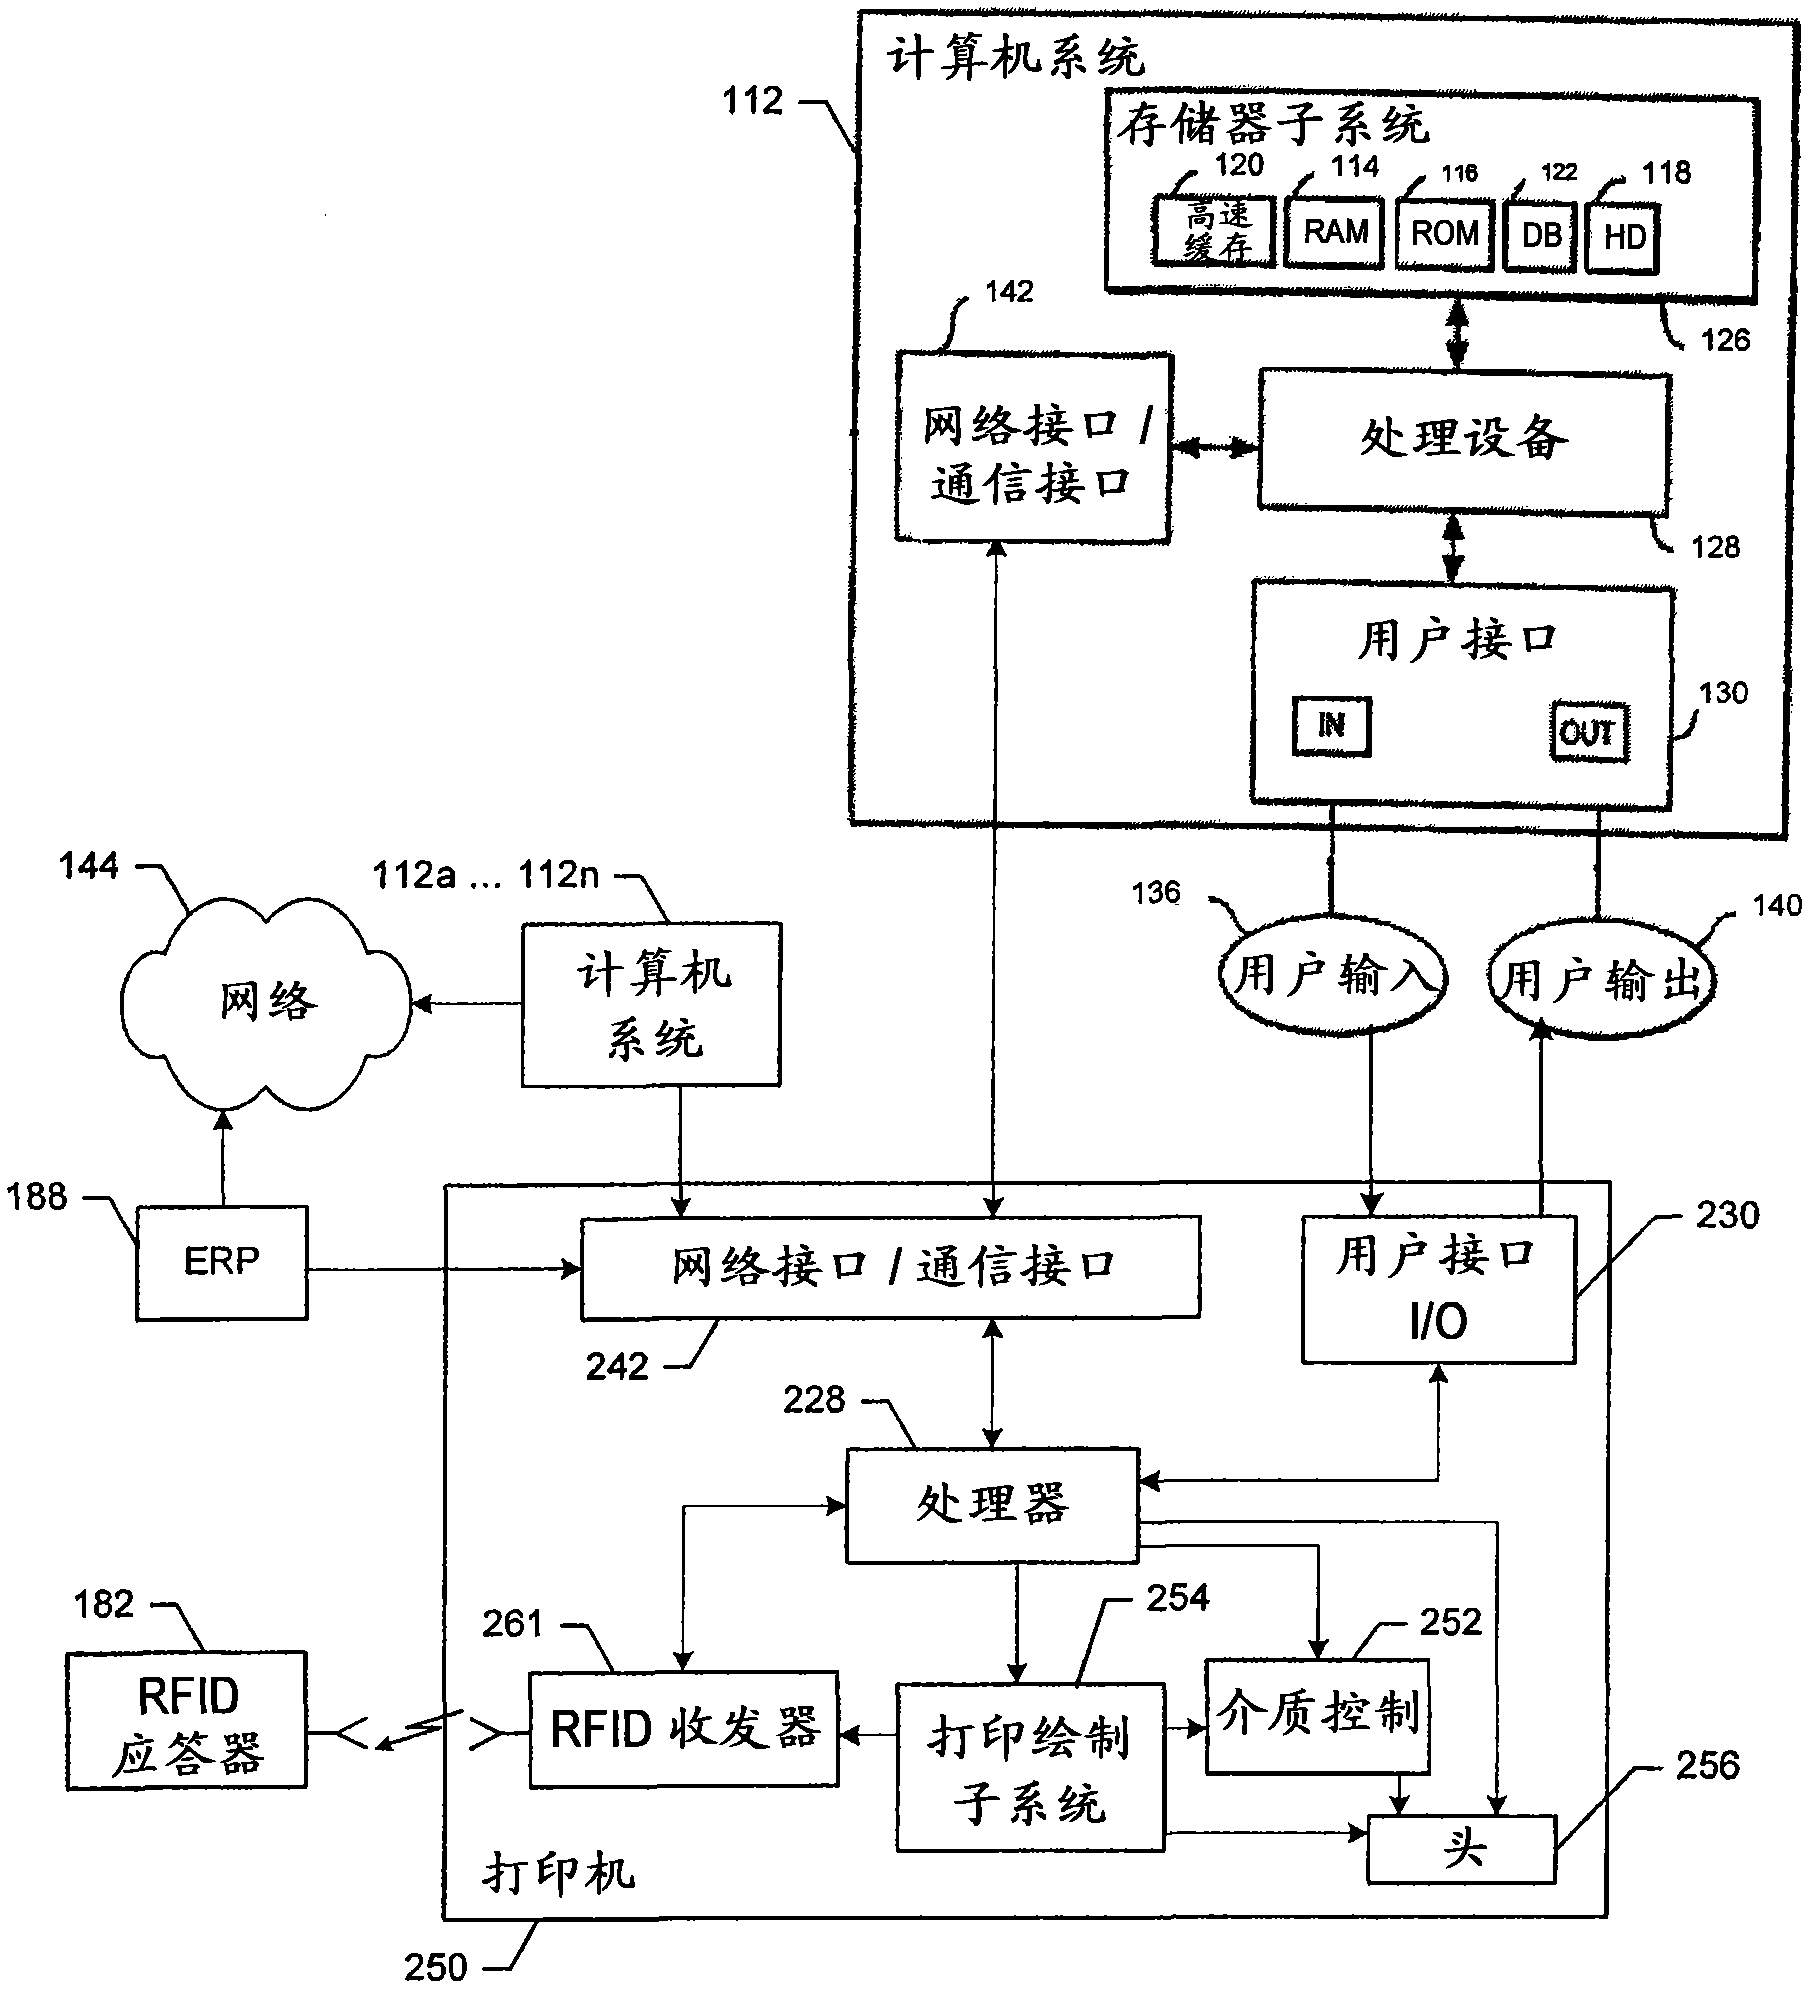 Detection of utf-16 encoding in streaming xml data without a byte-order mark and related printers, systems, methods, and computer program products